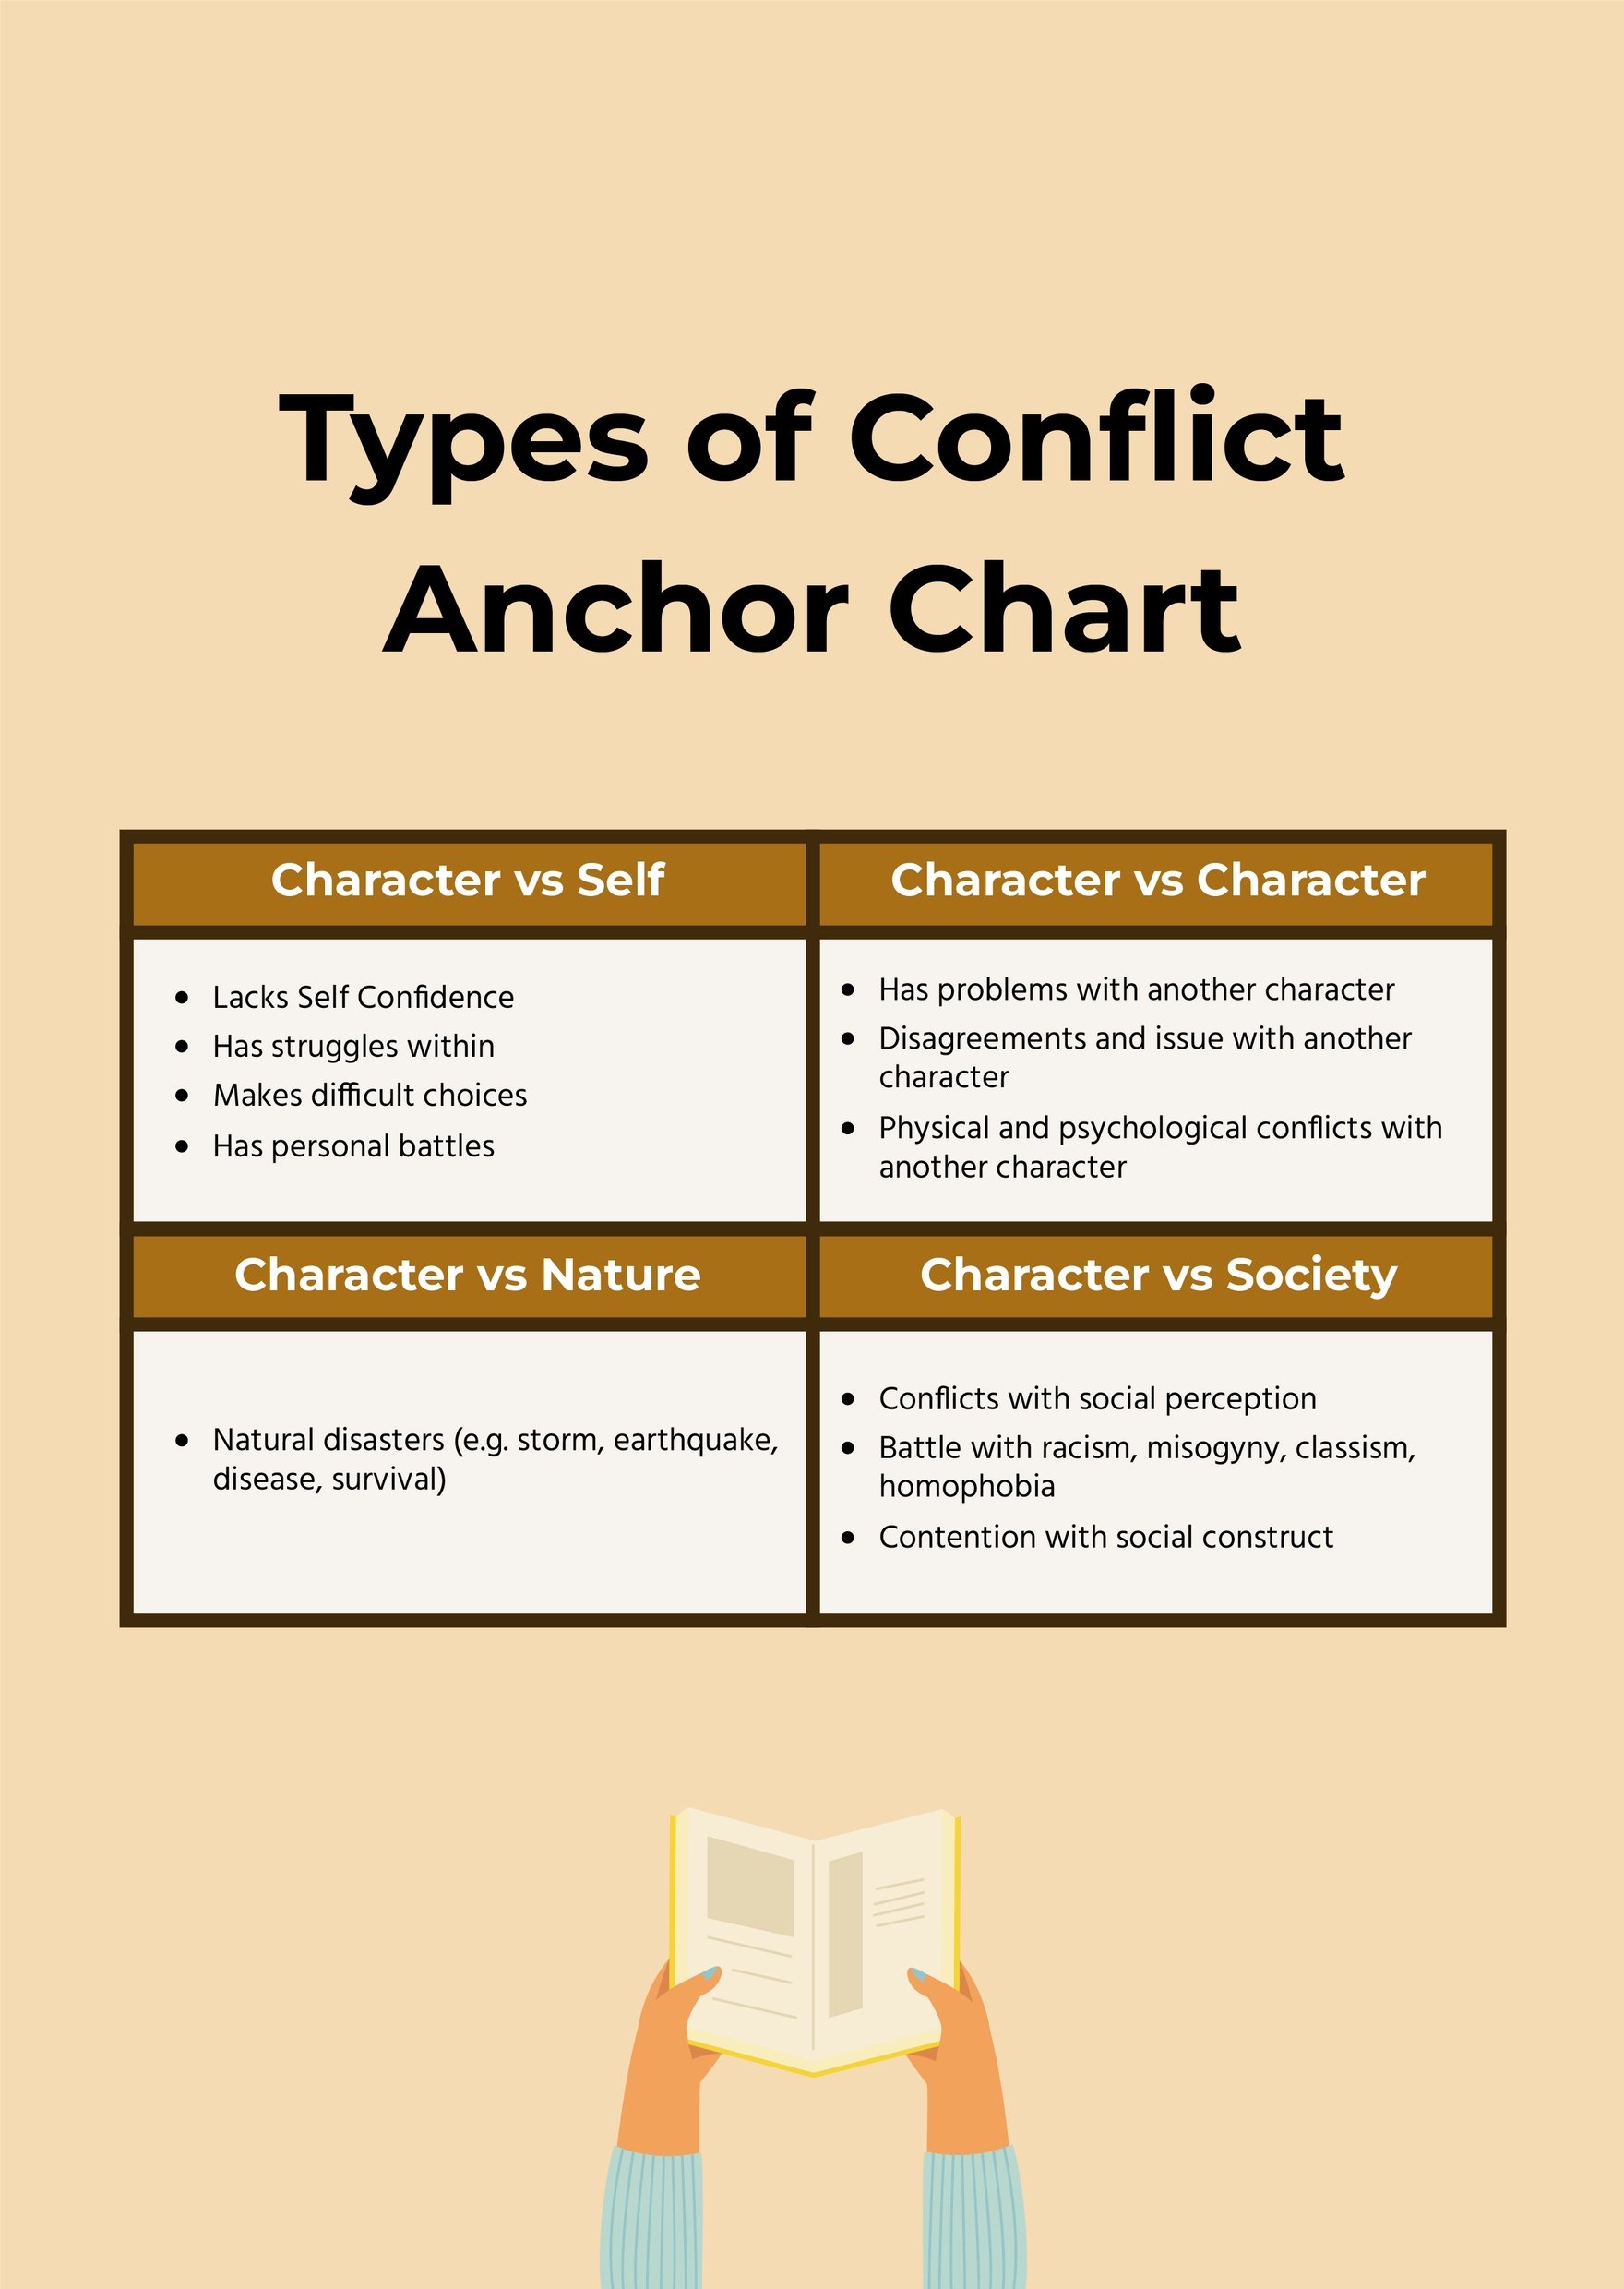 Types of Conflict Anchor Chart